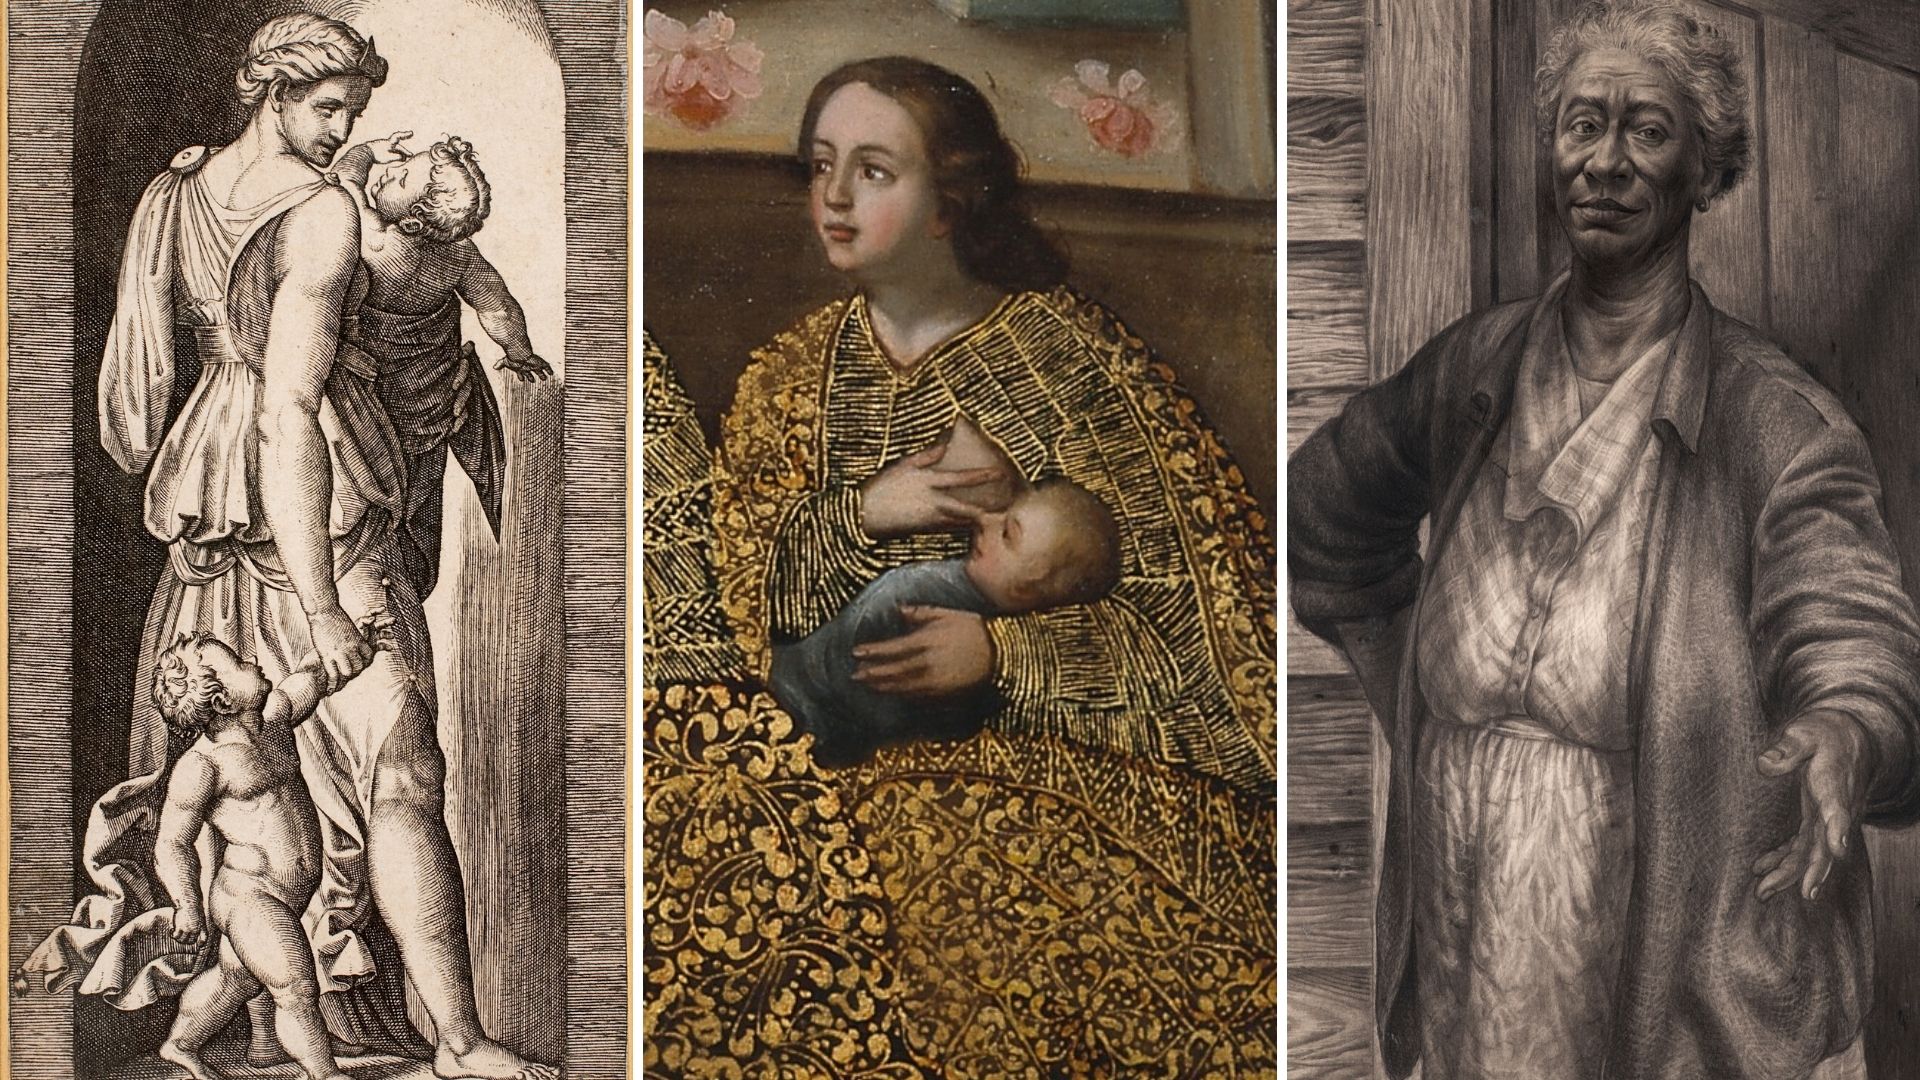 Three artworks side by side, the the first is a woman in Roman attire holding two babies, the second is a woman nursing a baby, and the third is a woman with an outstretched arm